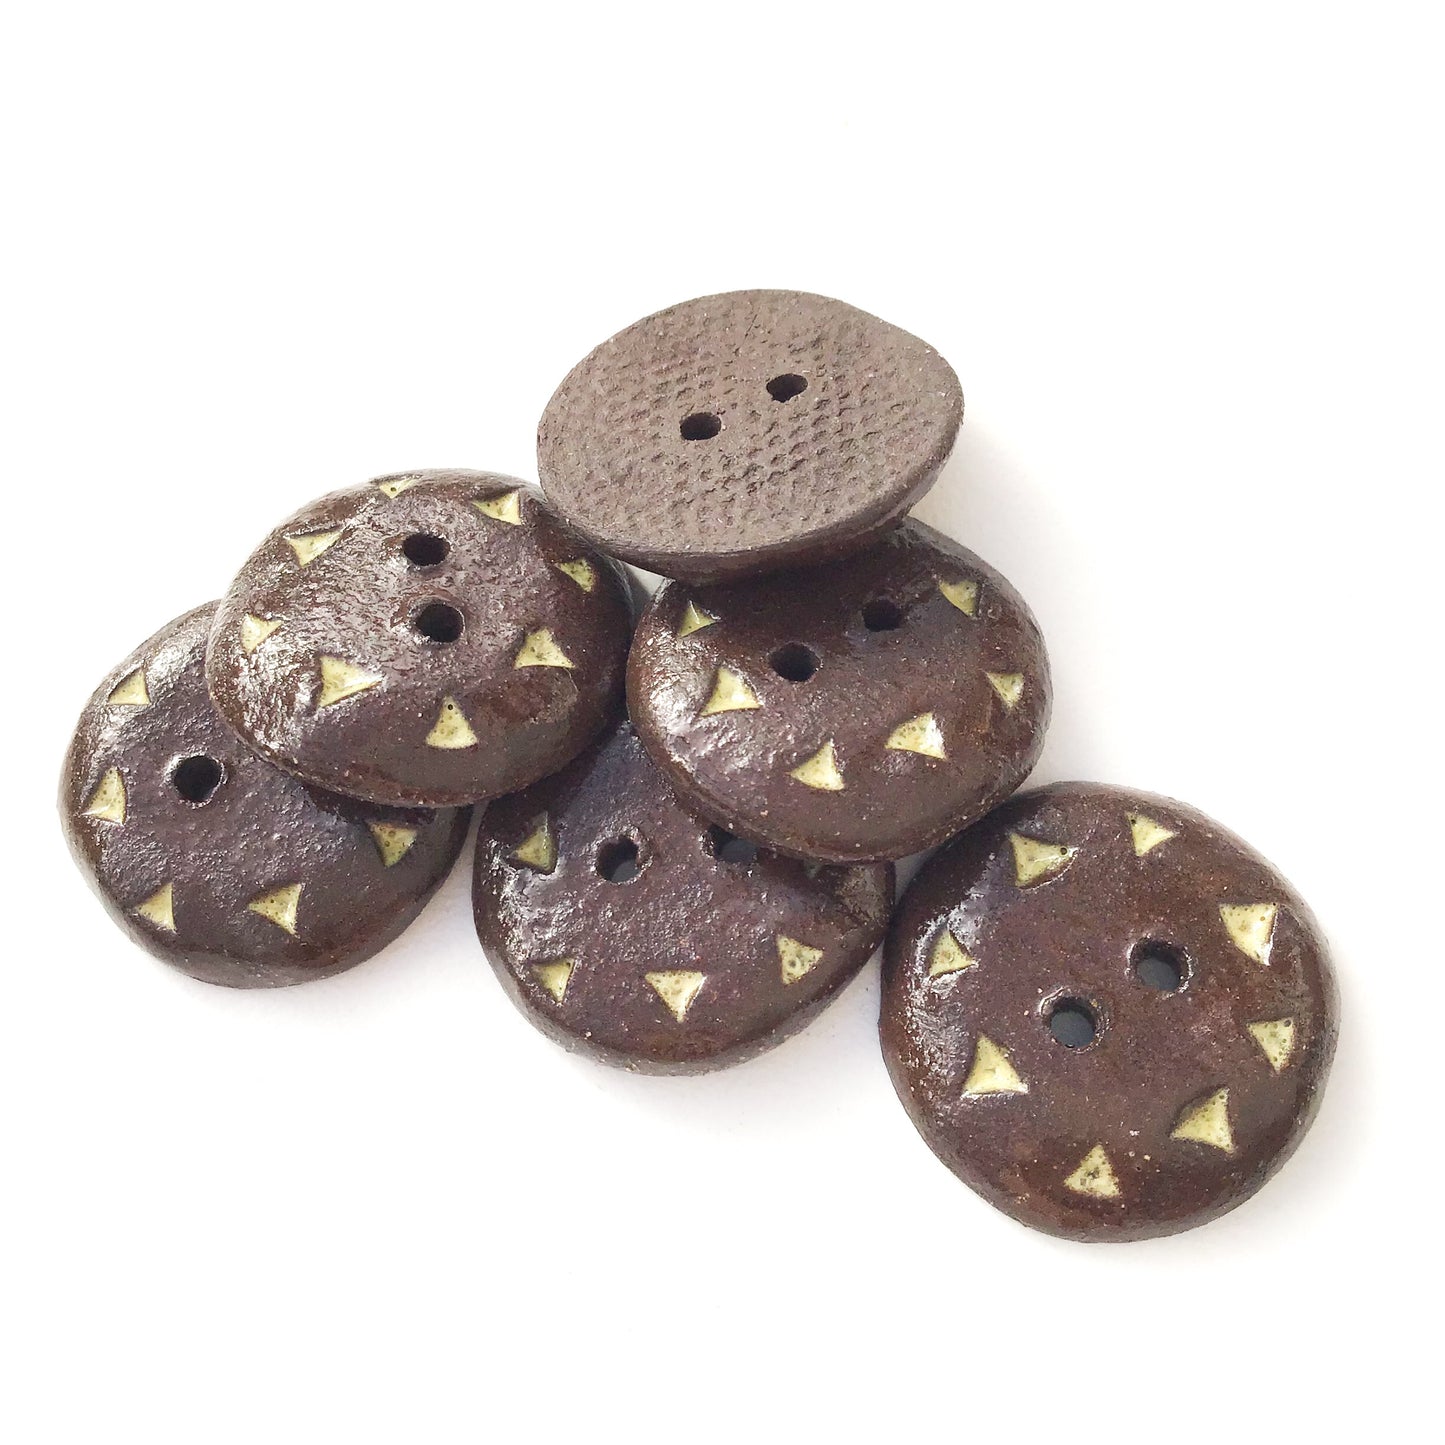 Black Clay Buttons with Yellow Detail - "The Sun" -13/16" - 6 Pack